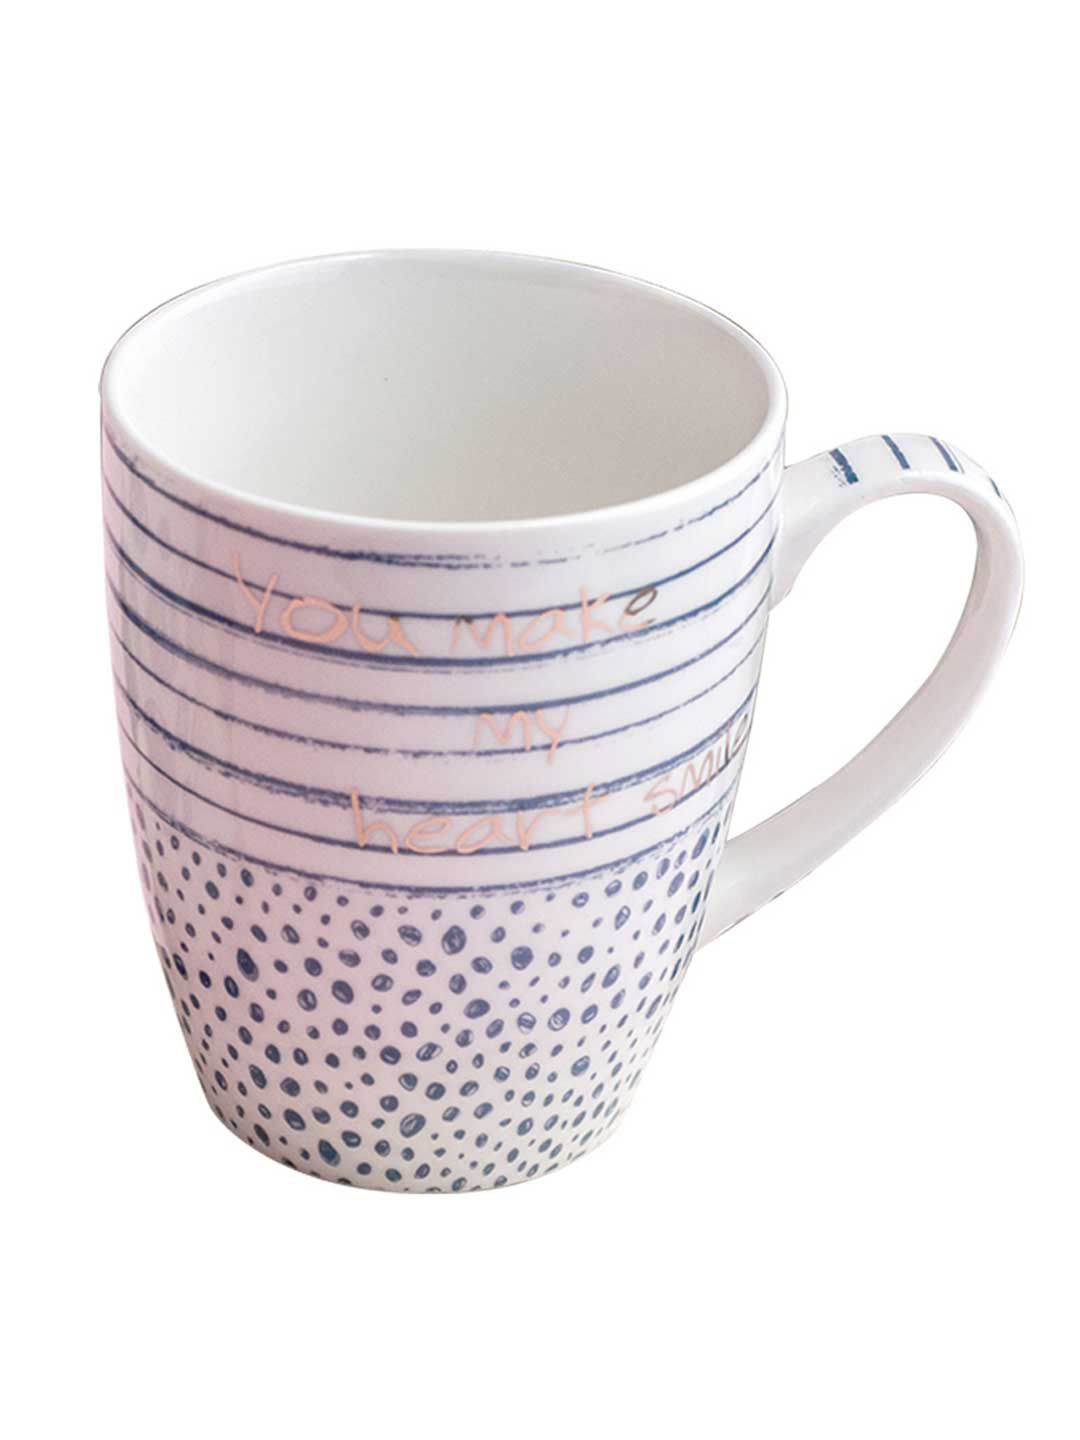 Art Street White & Blue Printed Ceramic Glossy Cups Set of Cups and Mugs Price in India